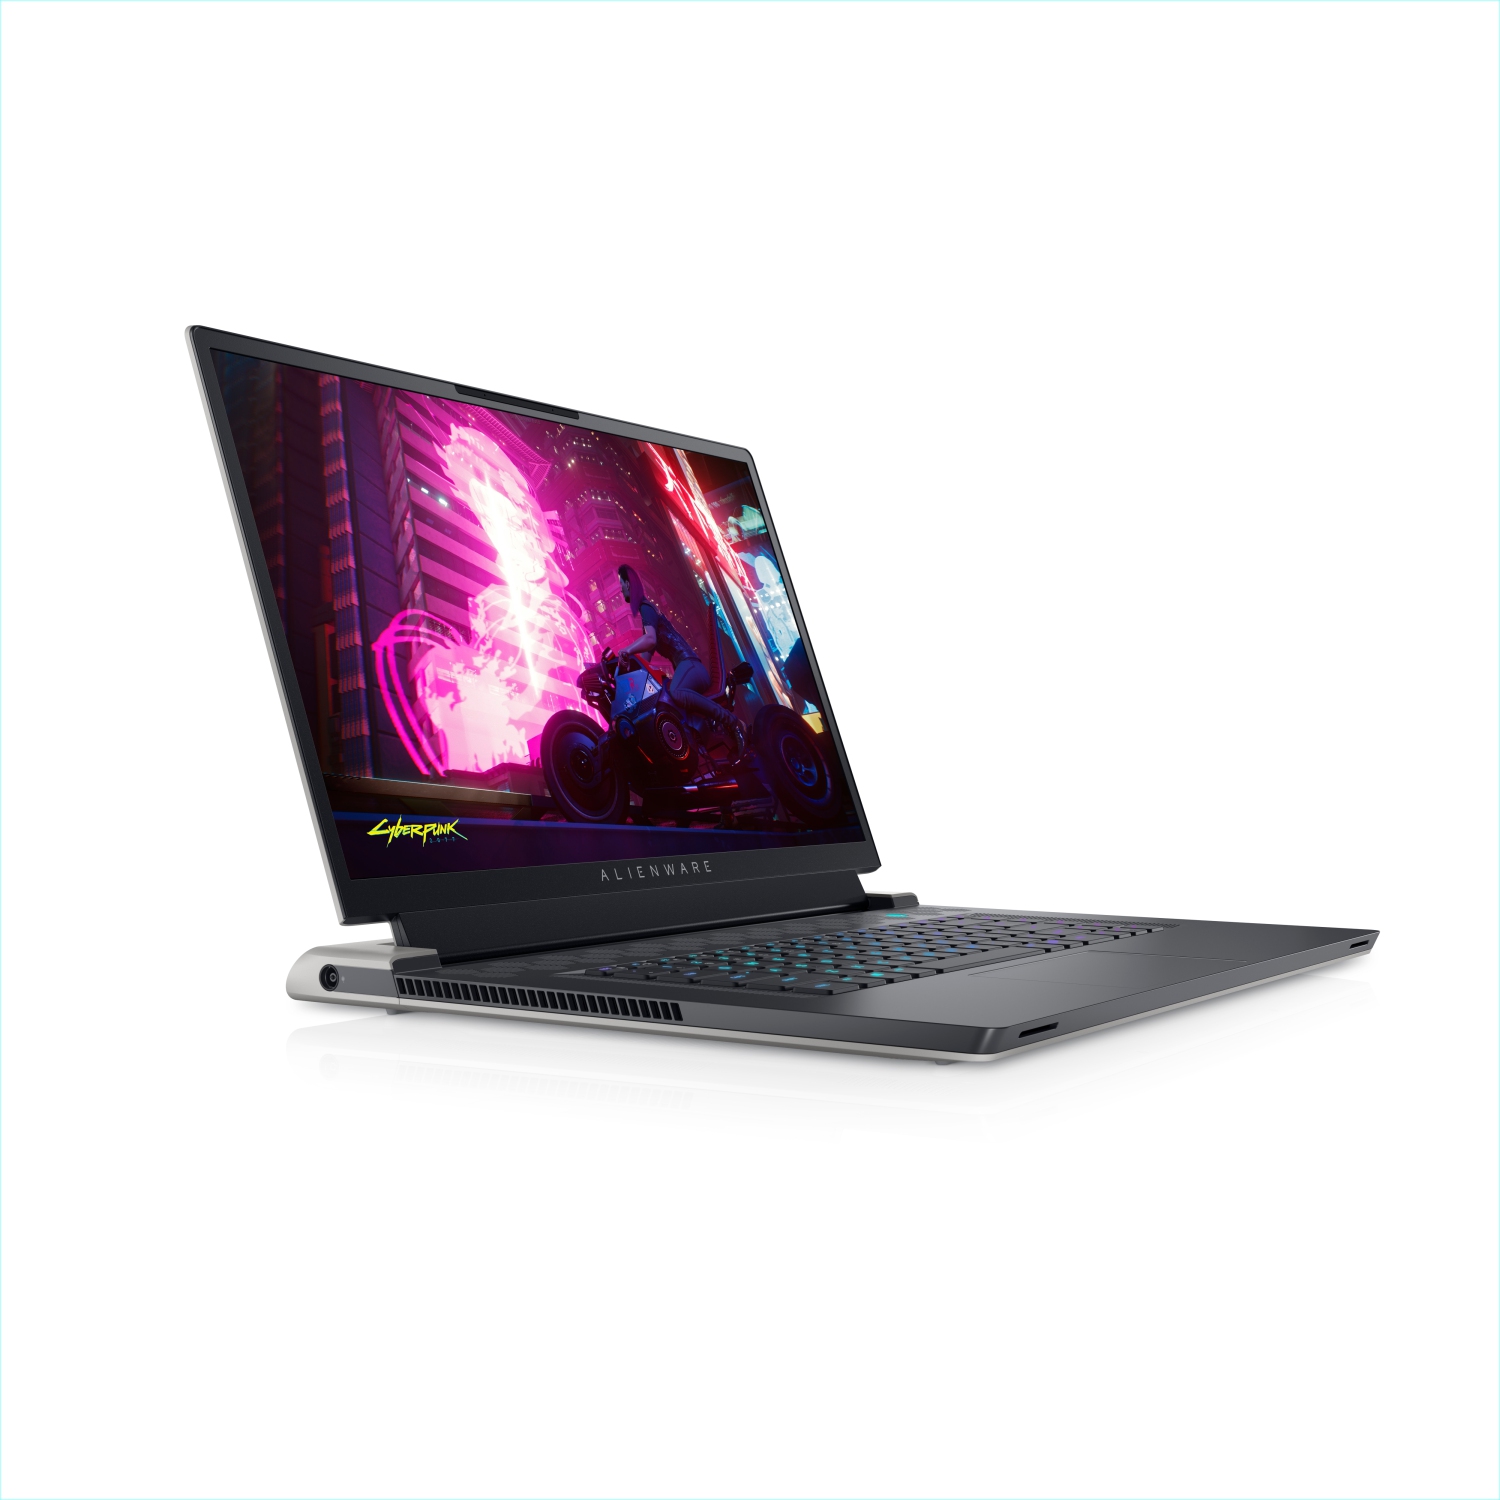 Refurbished (Excellent) - Dell Alienware X17 R1 Gaming Laptop (2021), 17.3" FHD, Core i7, 1TB SSD, 16GB RAM, RTX 3070, 8 Cores @ 4.6 GHz, 11th Gen CPU Certified